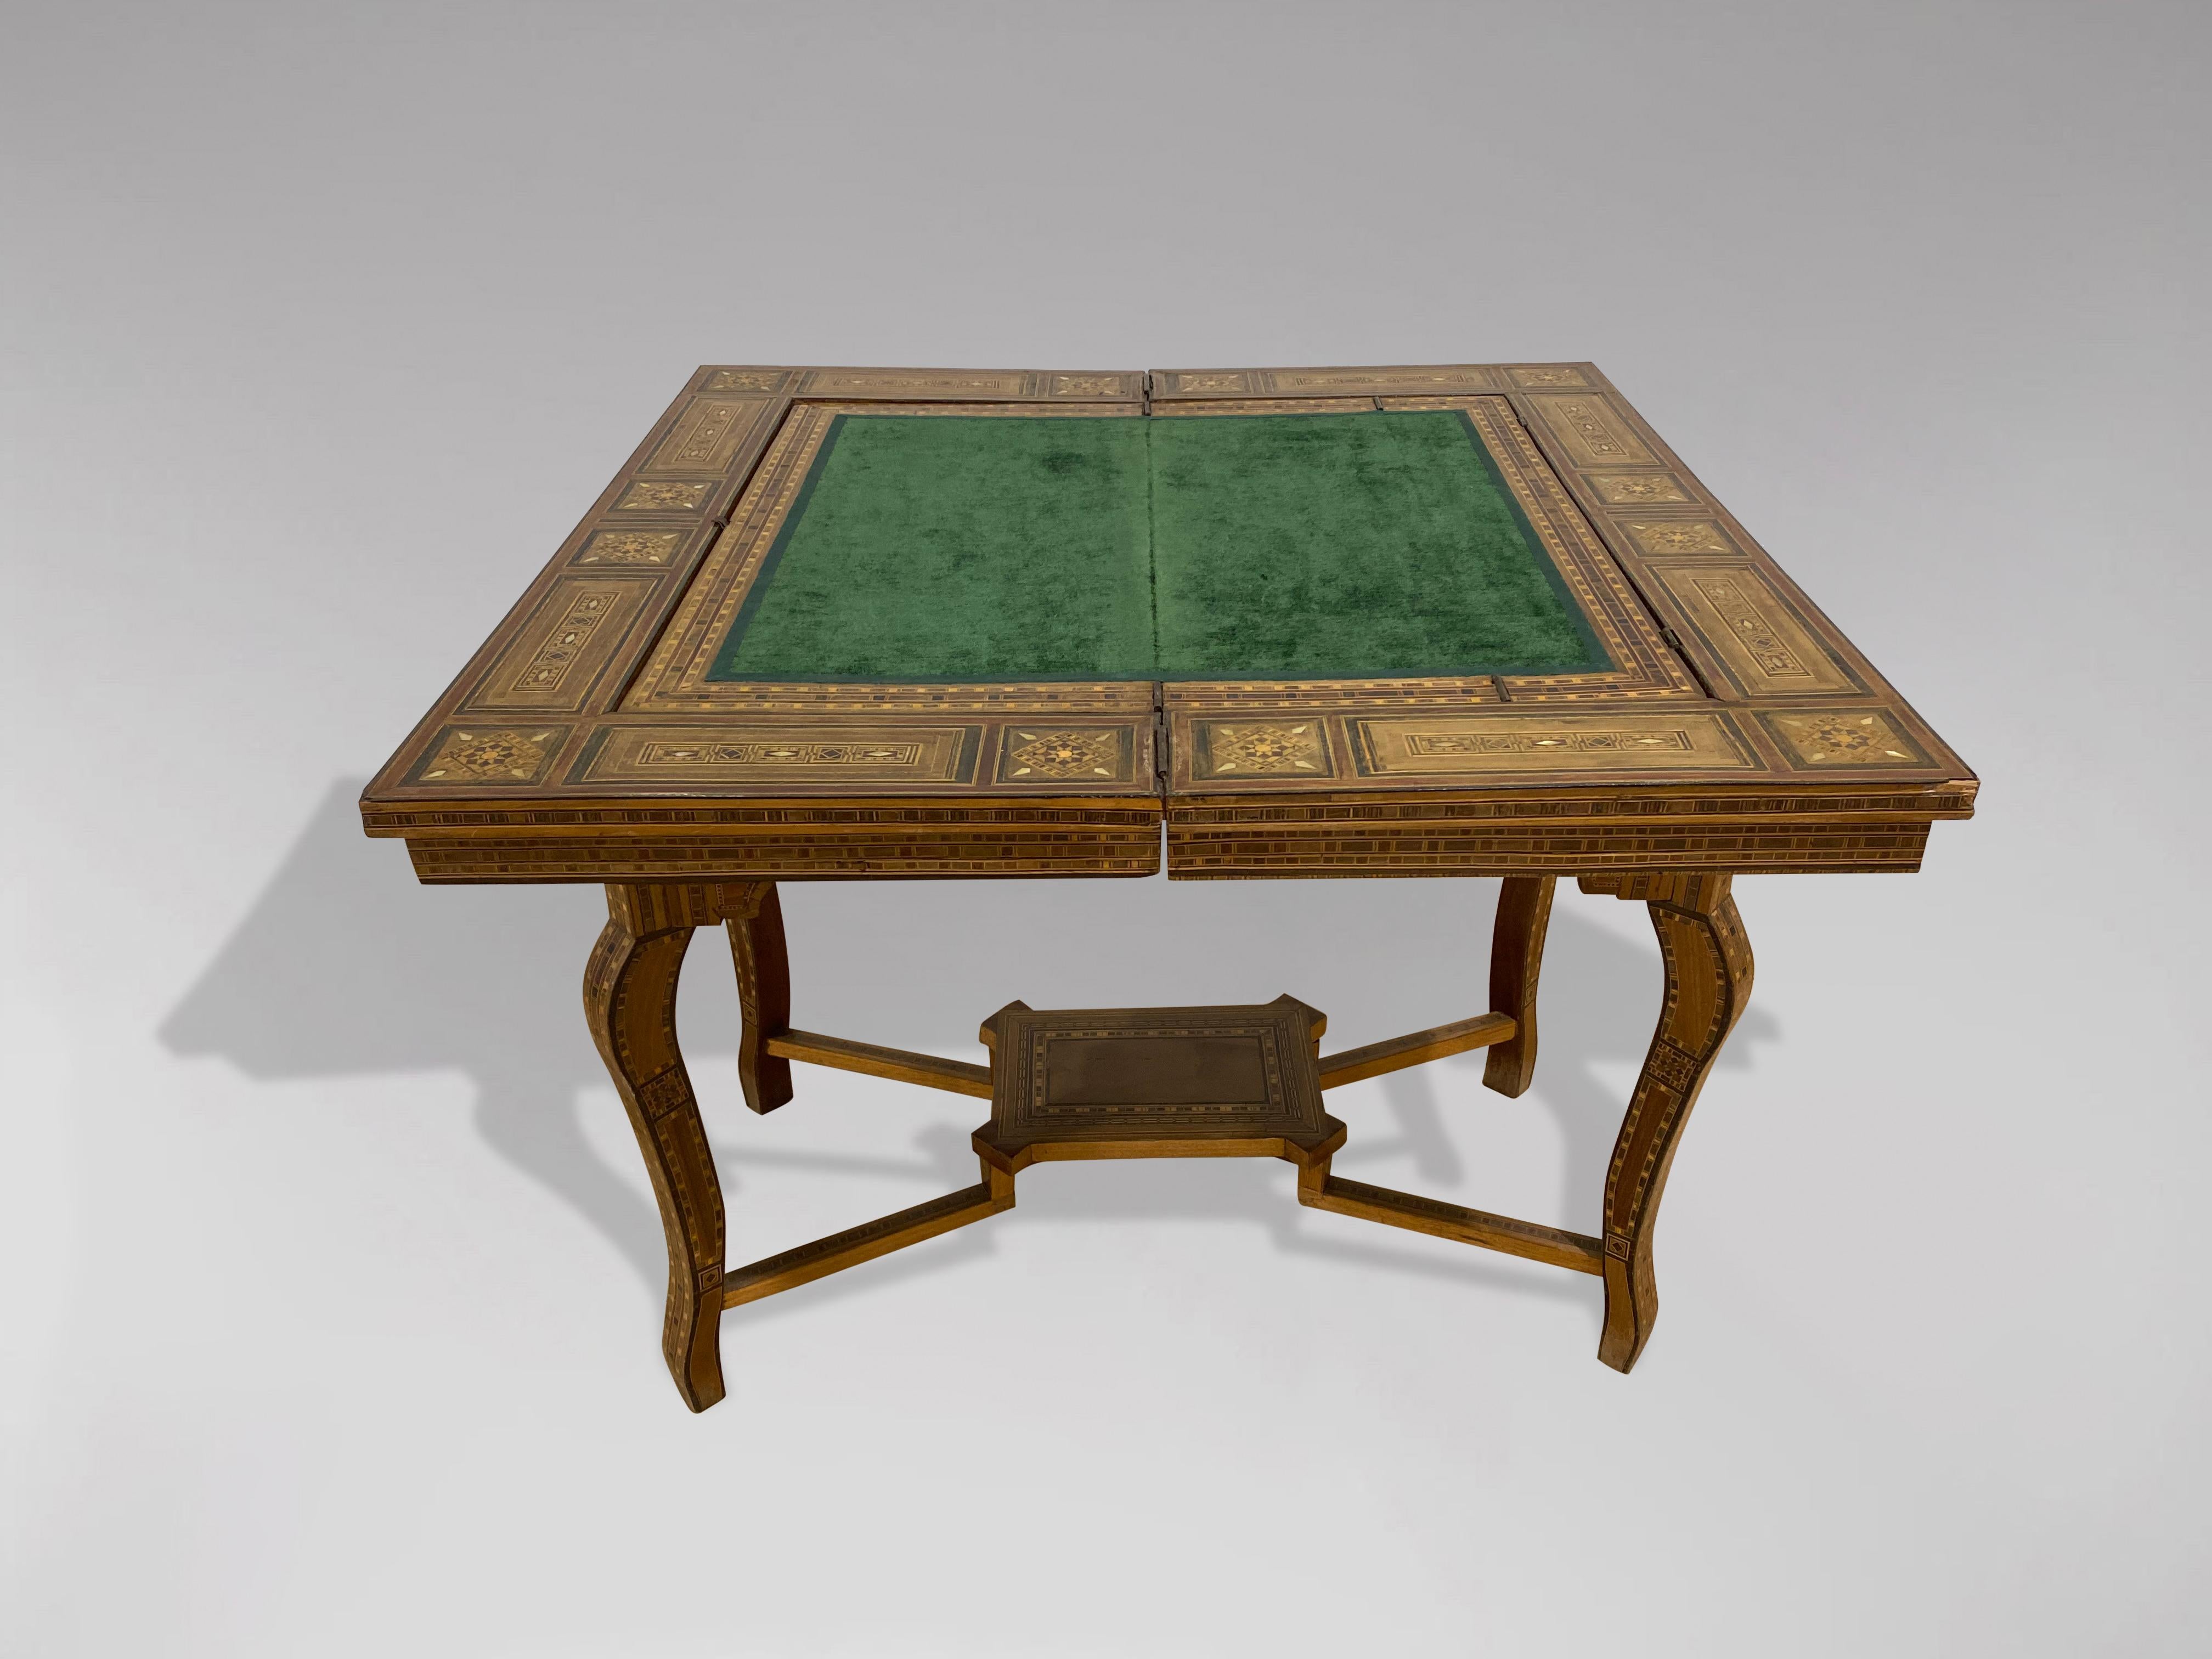 A stunning late 19th century, early 20th century Syrian Damascus marquetry and inlaid games table for cards, chess, draughts and backgammon with inlaid counters. The top swivels and lifts to reveal a green velvet inset playing surface which also